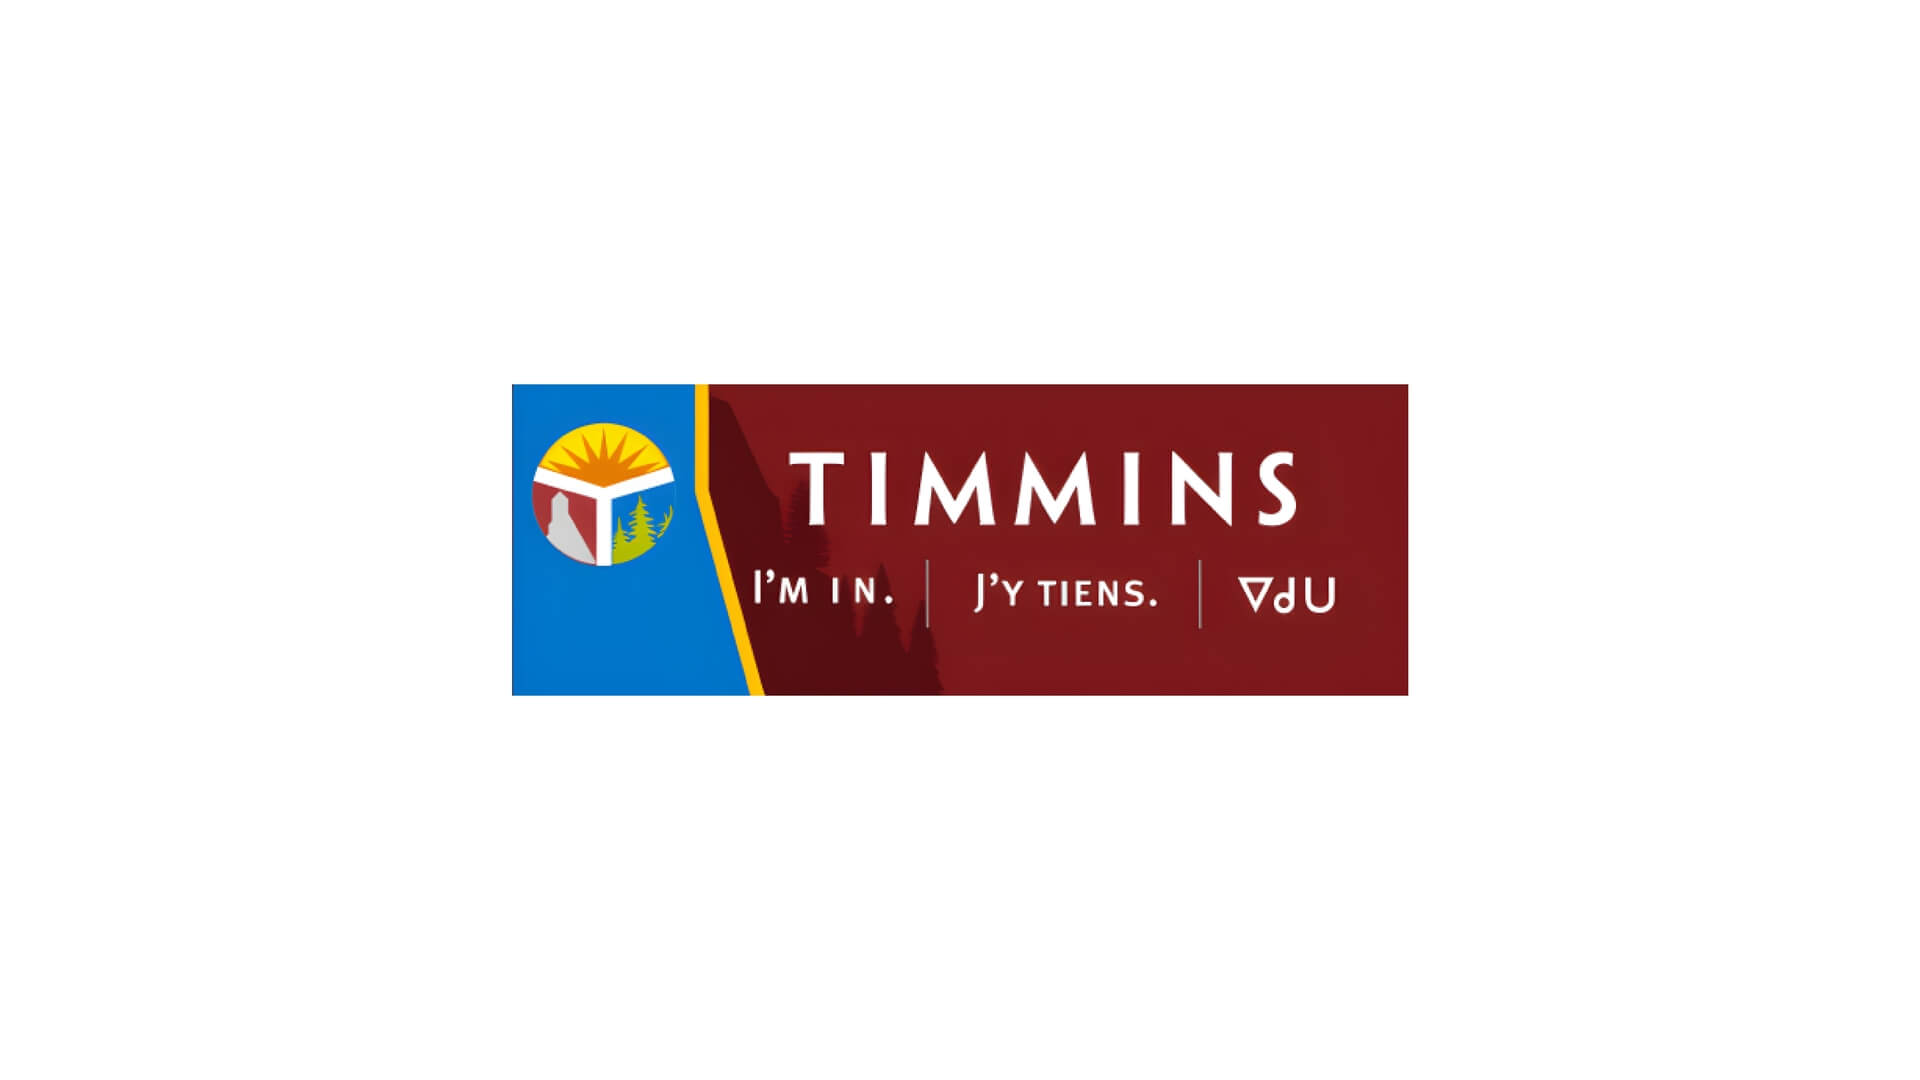 Timmins Care Rectangular bilingual sign featuring the timmins, ontario logo with "i'm in." in english, and "j'y tiens." in french, against a blue and maroon background. Cochrane District Social Services Administration Board